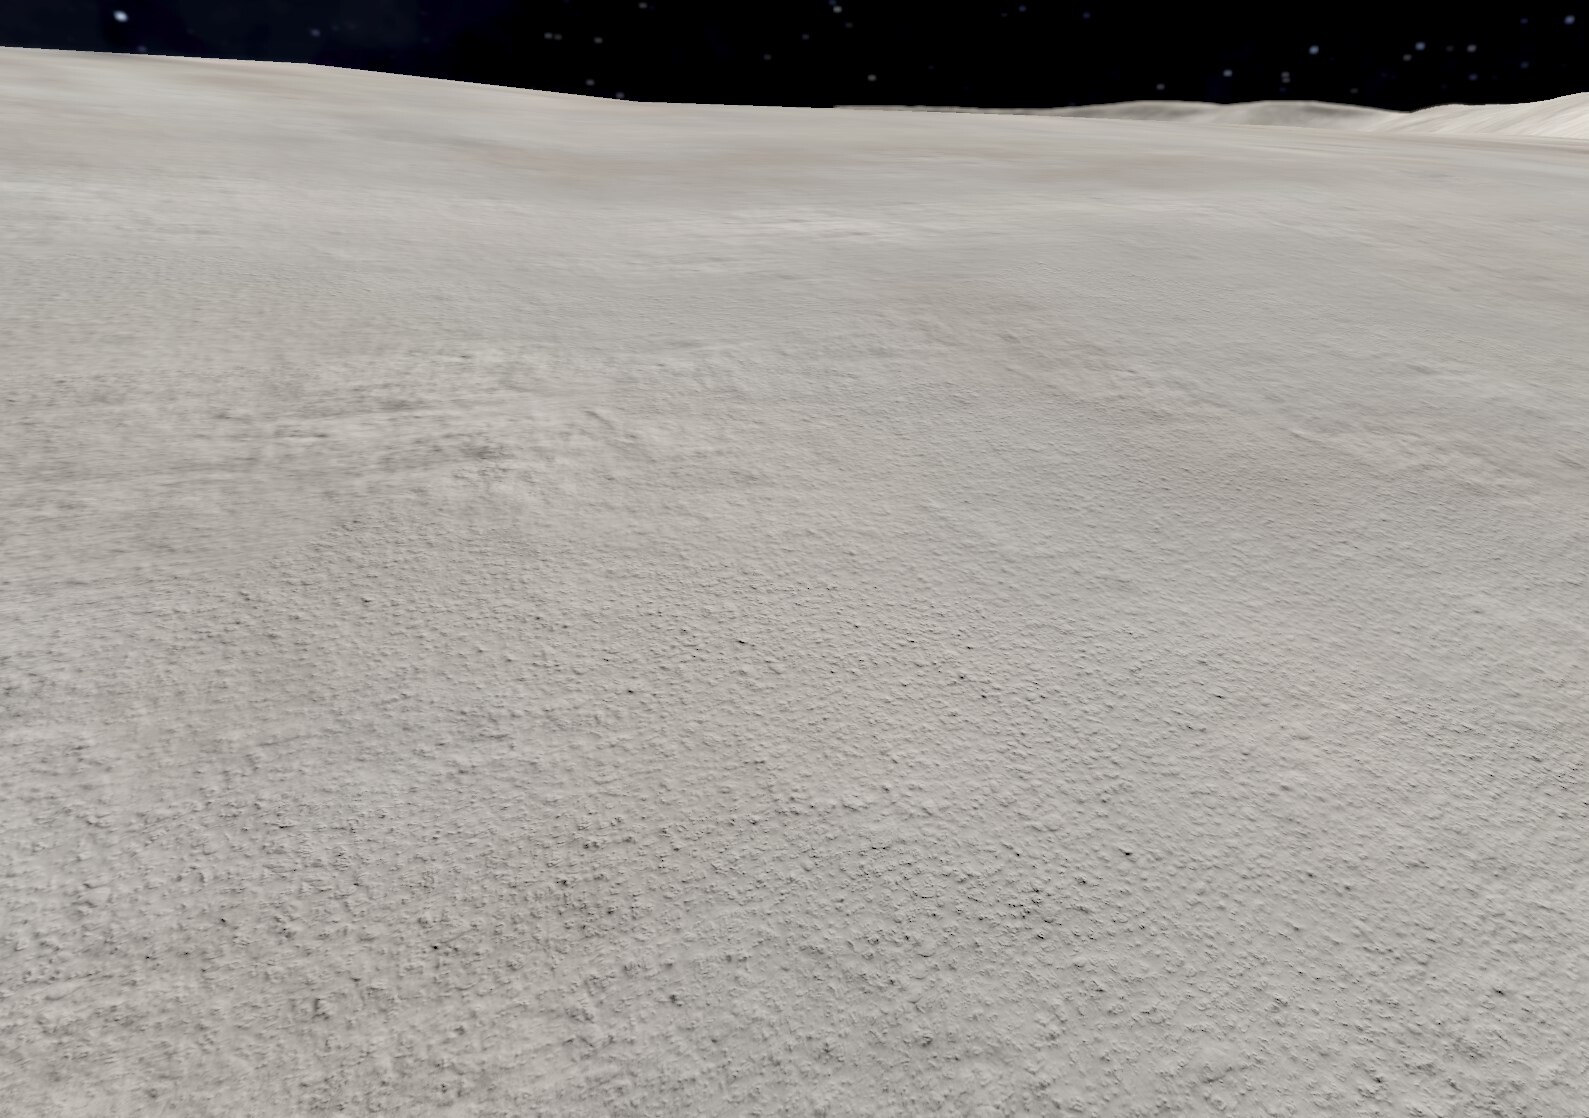 Close moon surface with micro details and variation all over the shader